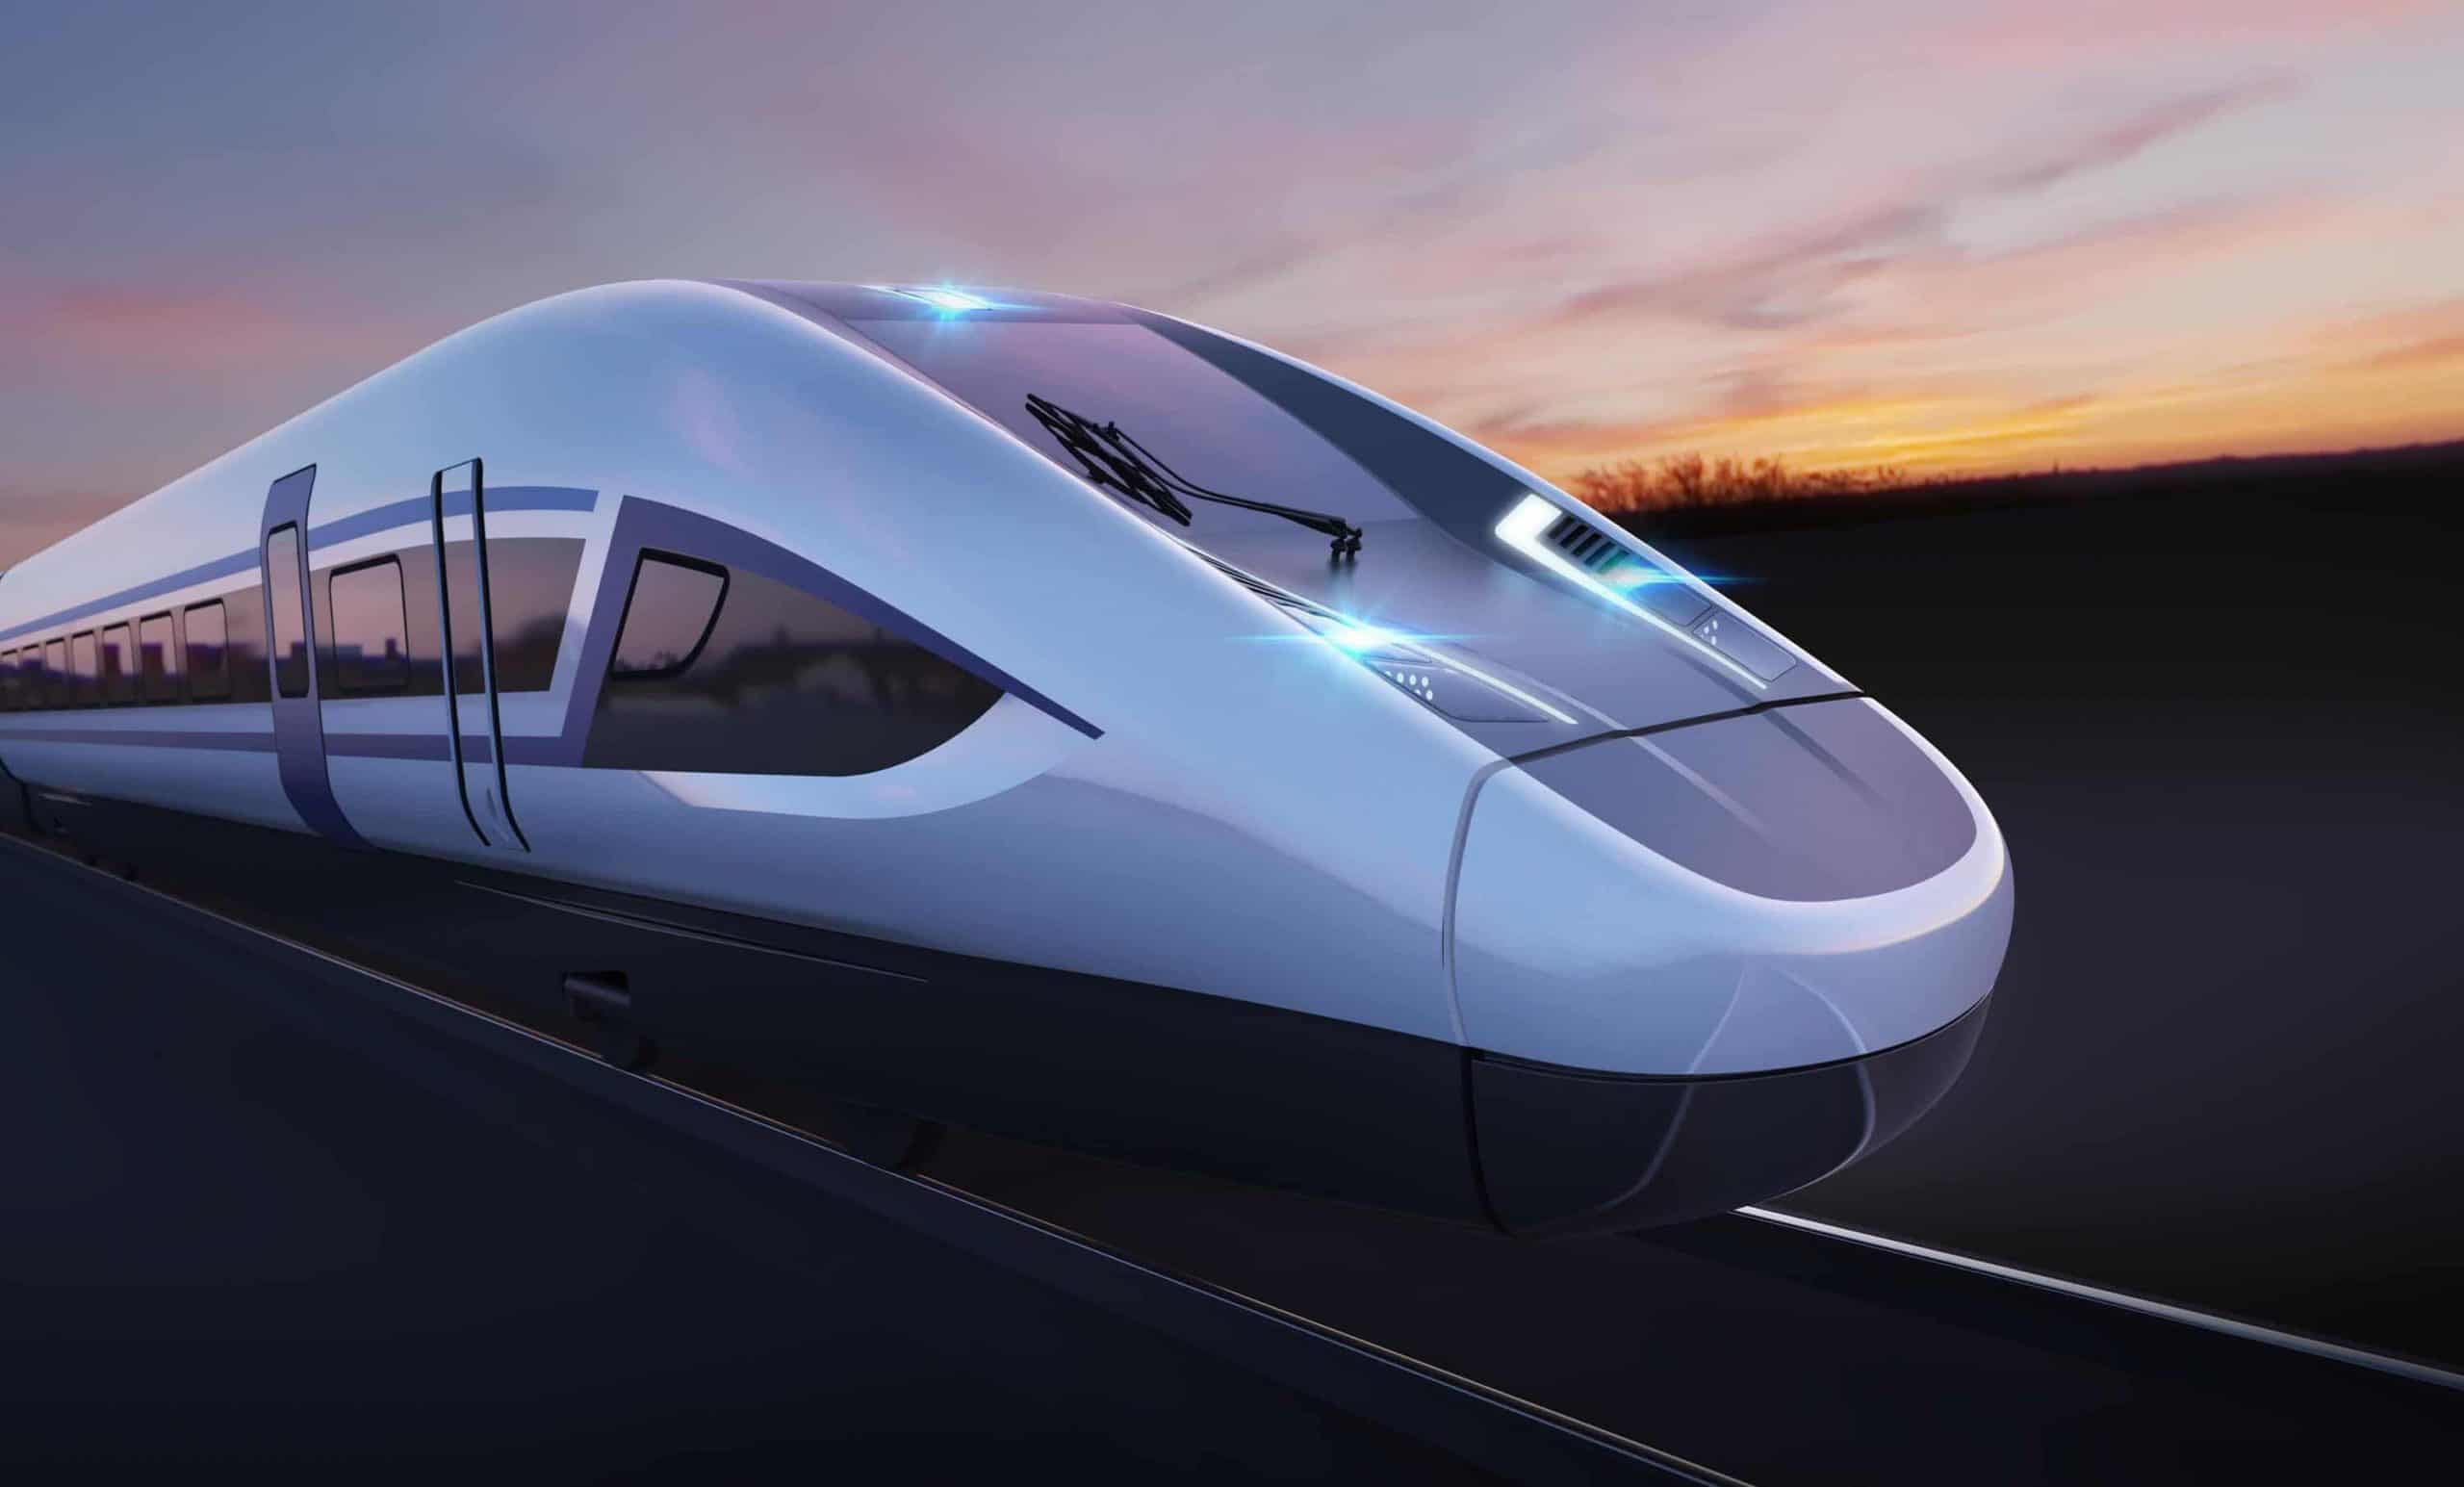 Cabinet minister says his gut feeling is HS2 should go ahead